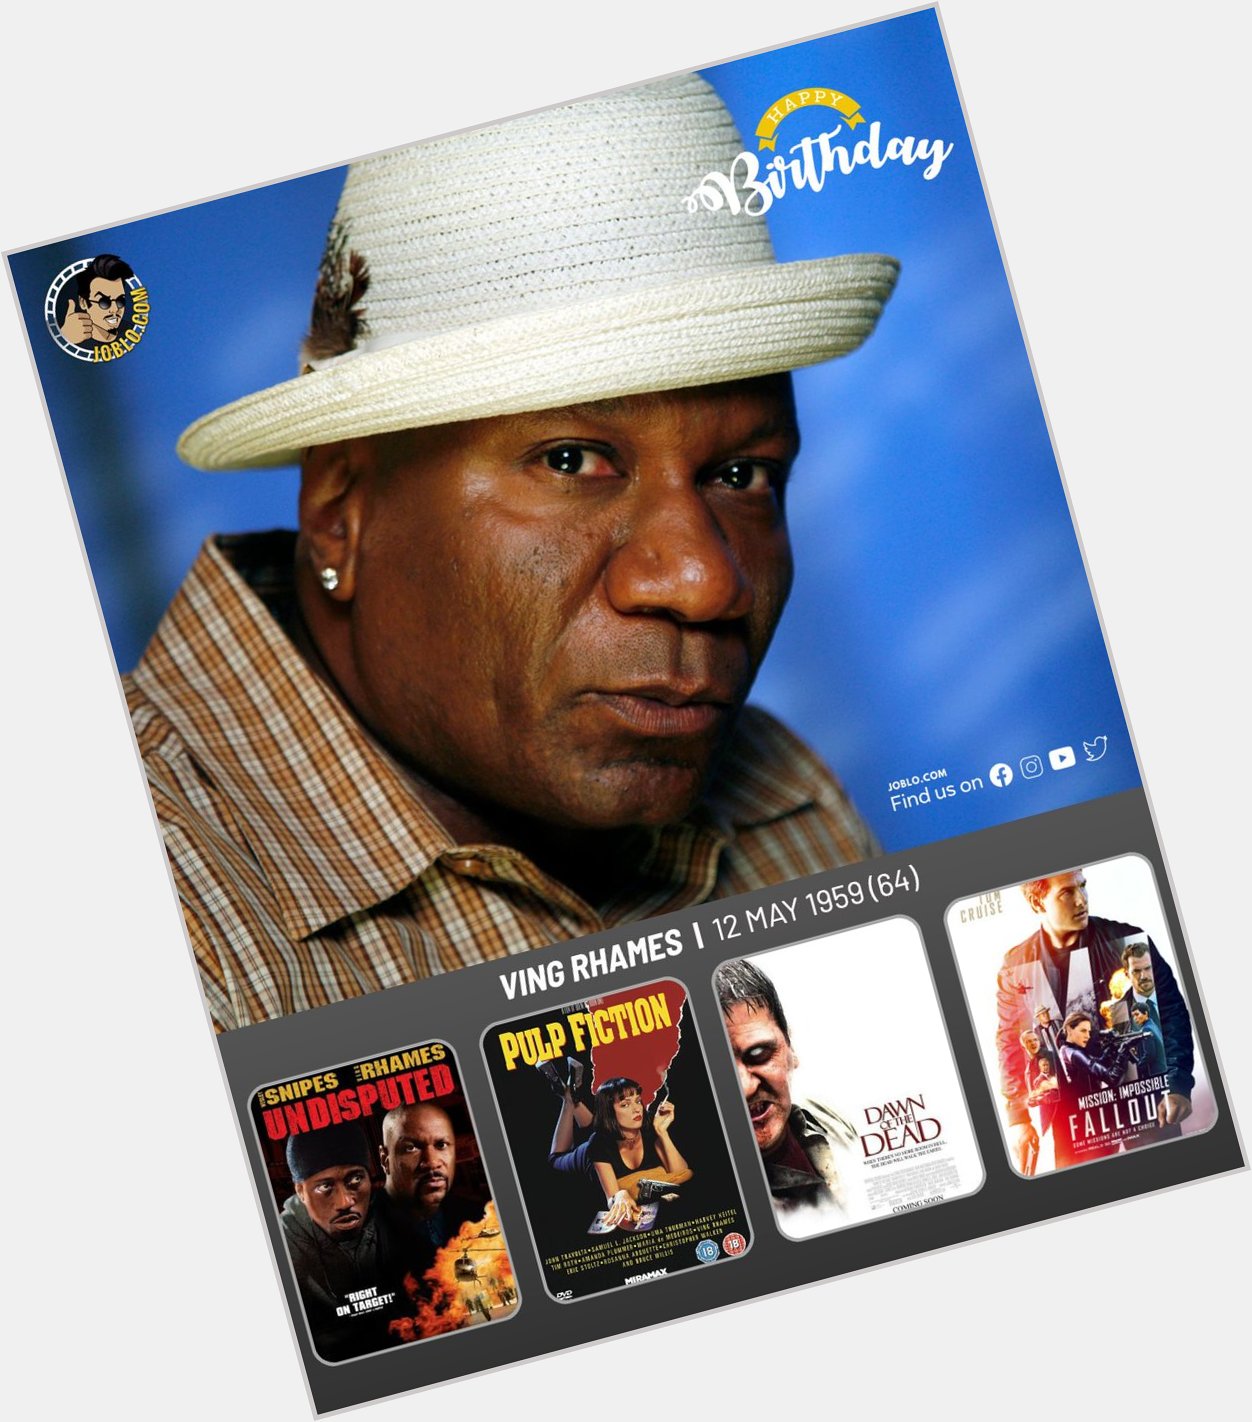 Happy birthday to Ving Rhames, who turns 64 today!    